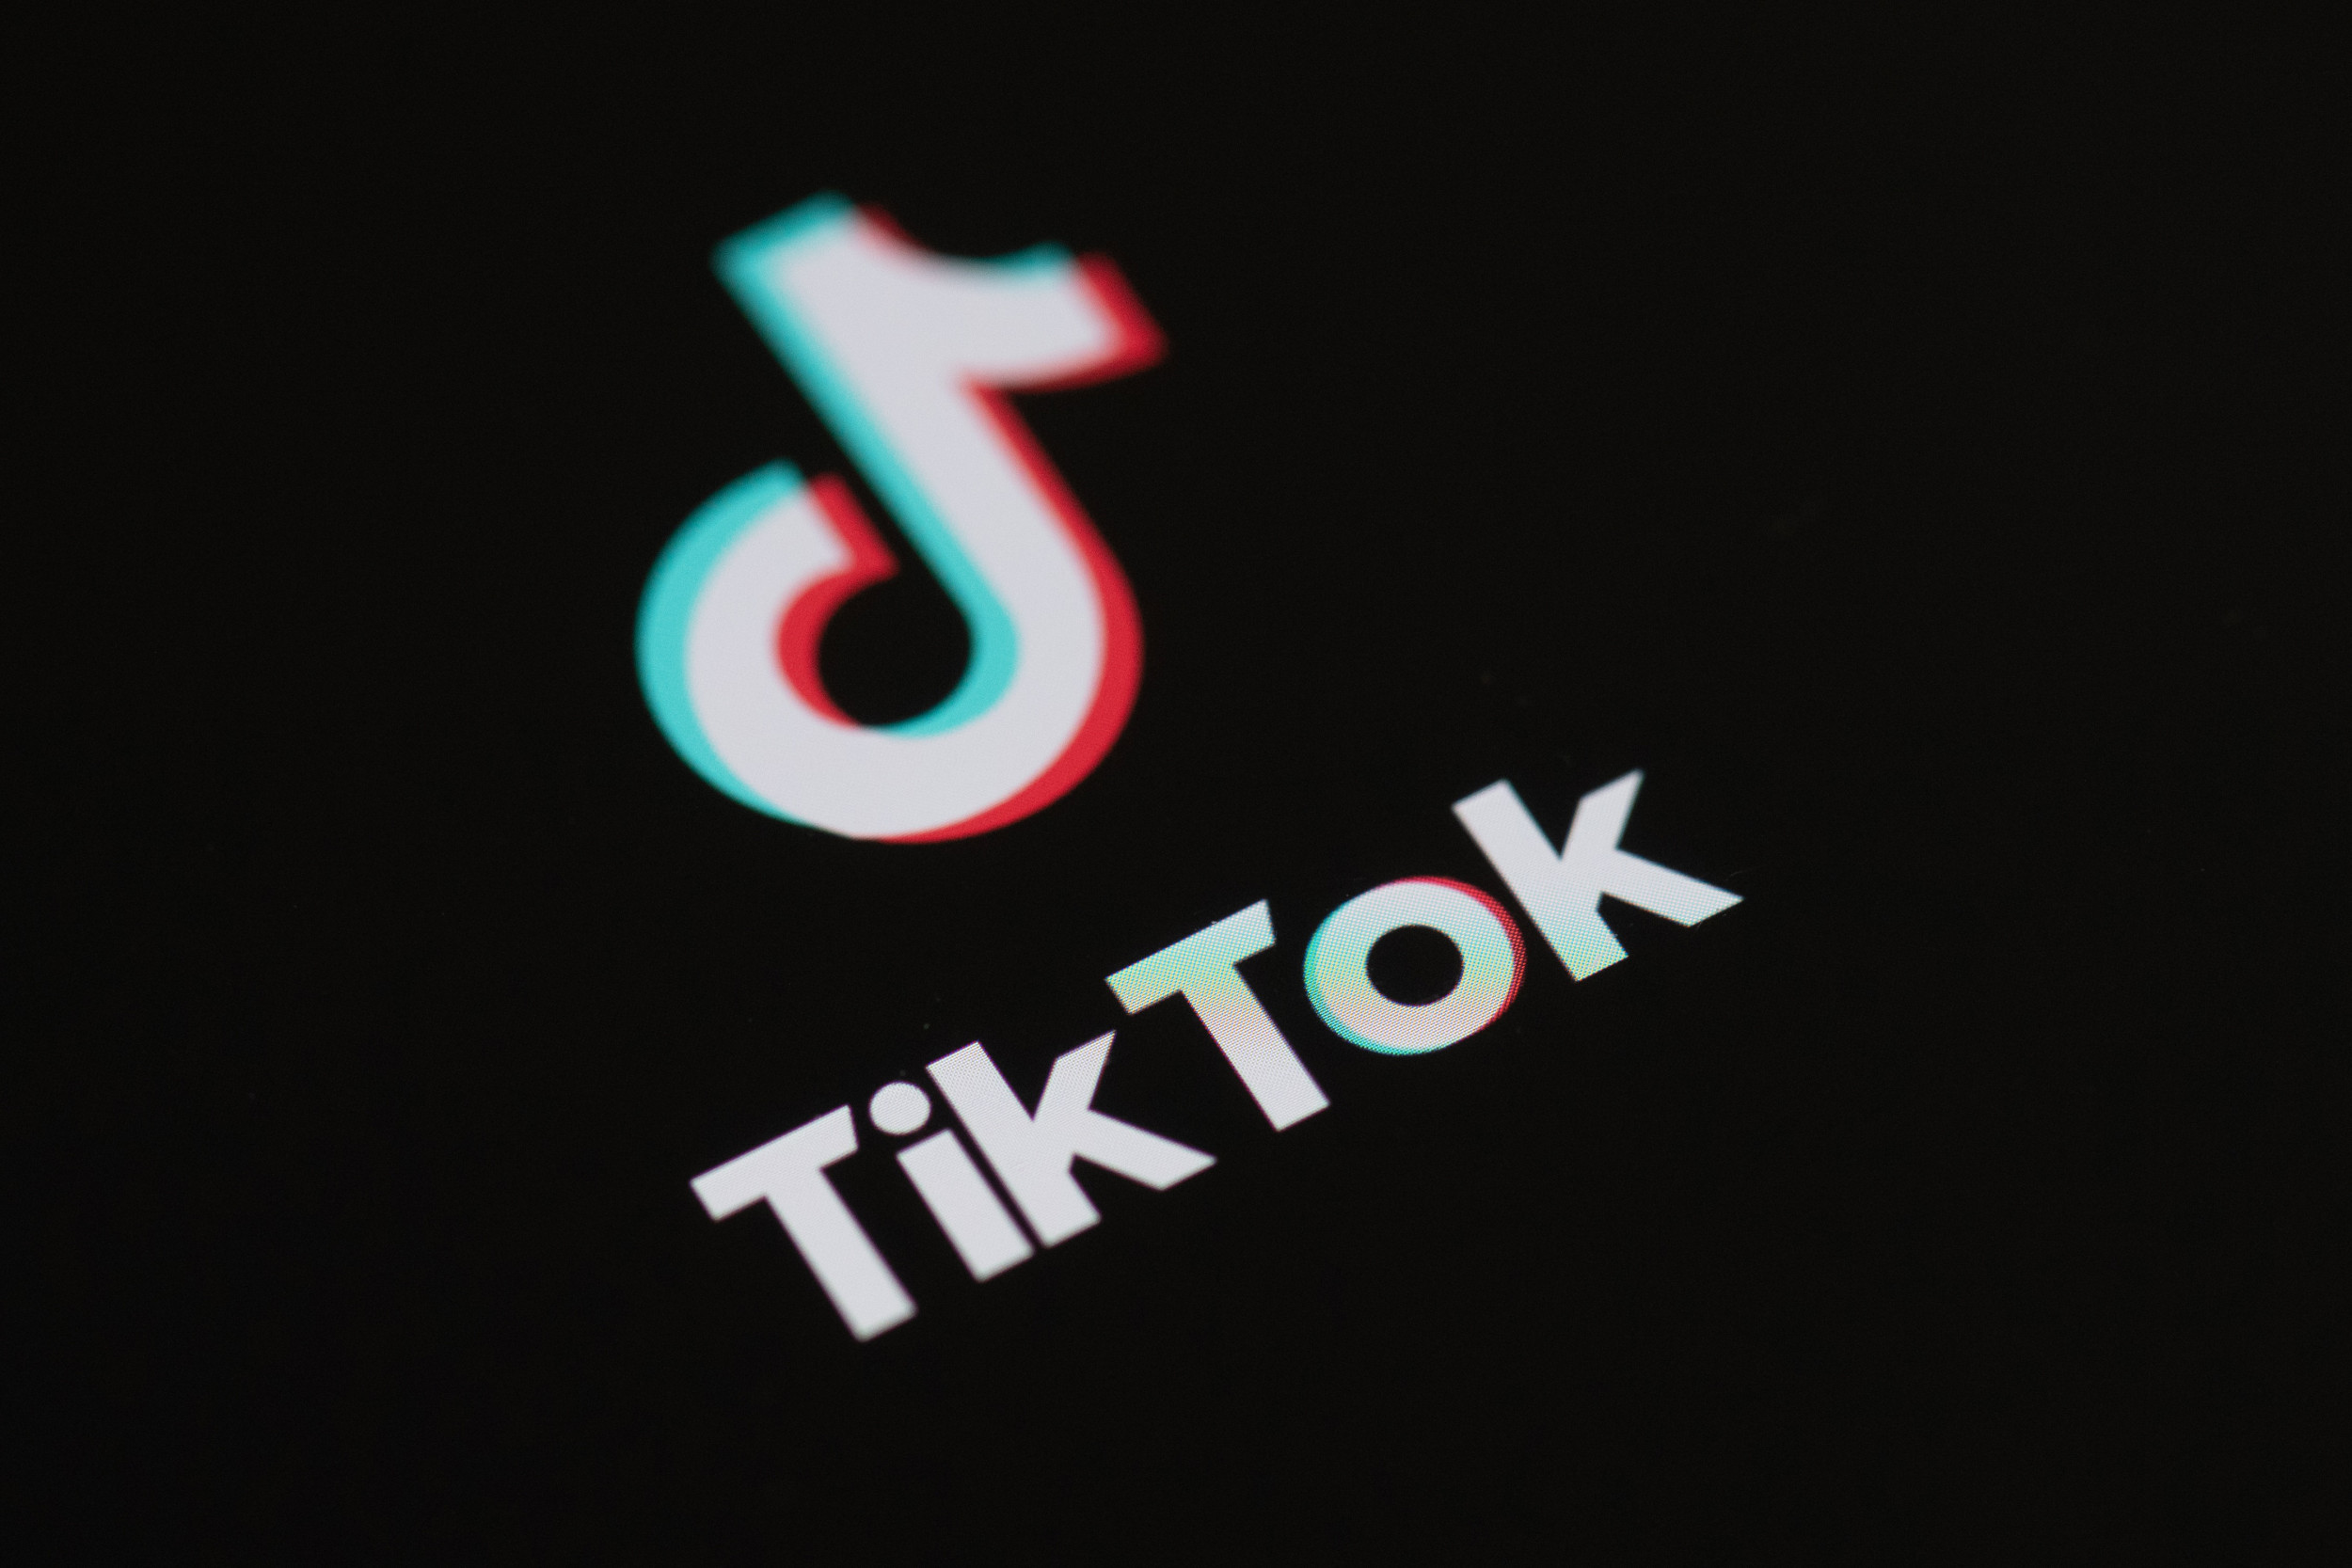 TikTok news & latest pictures from